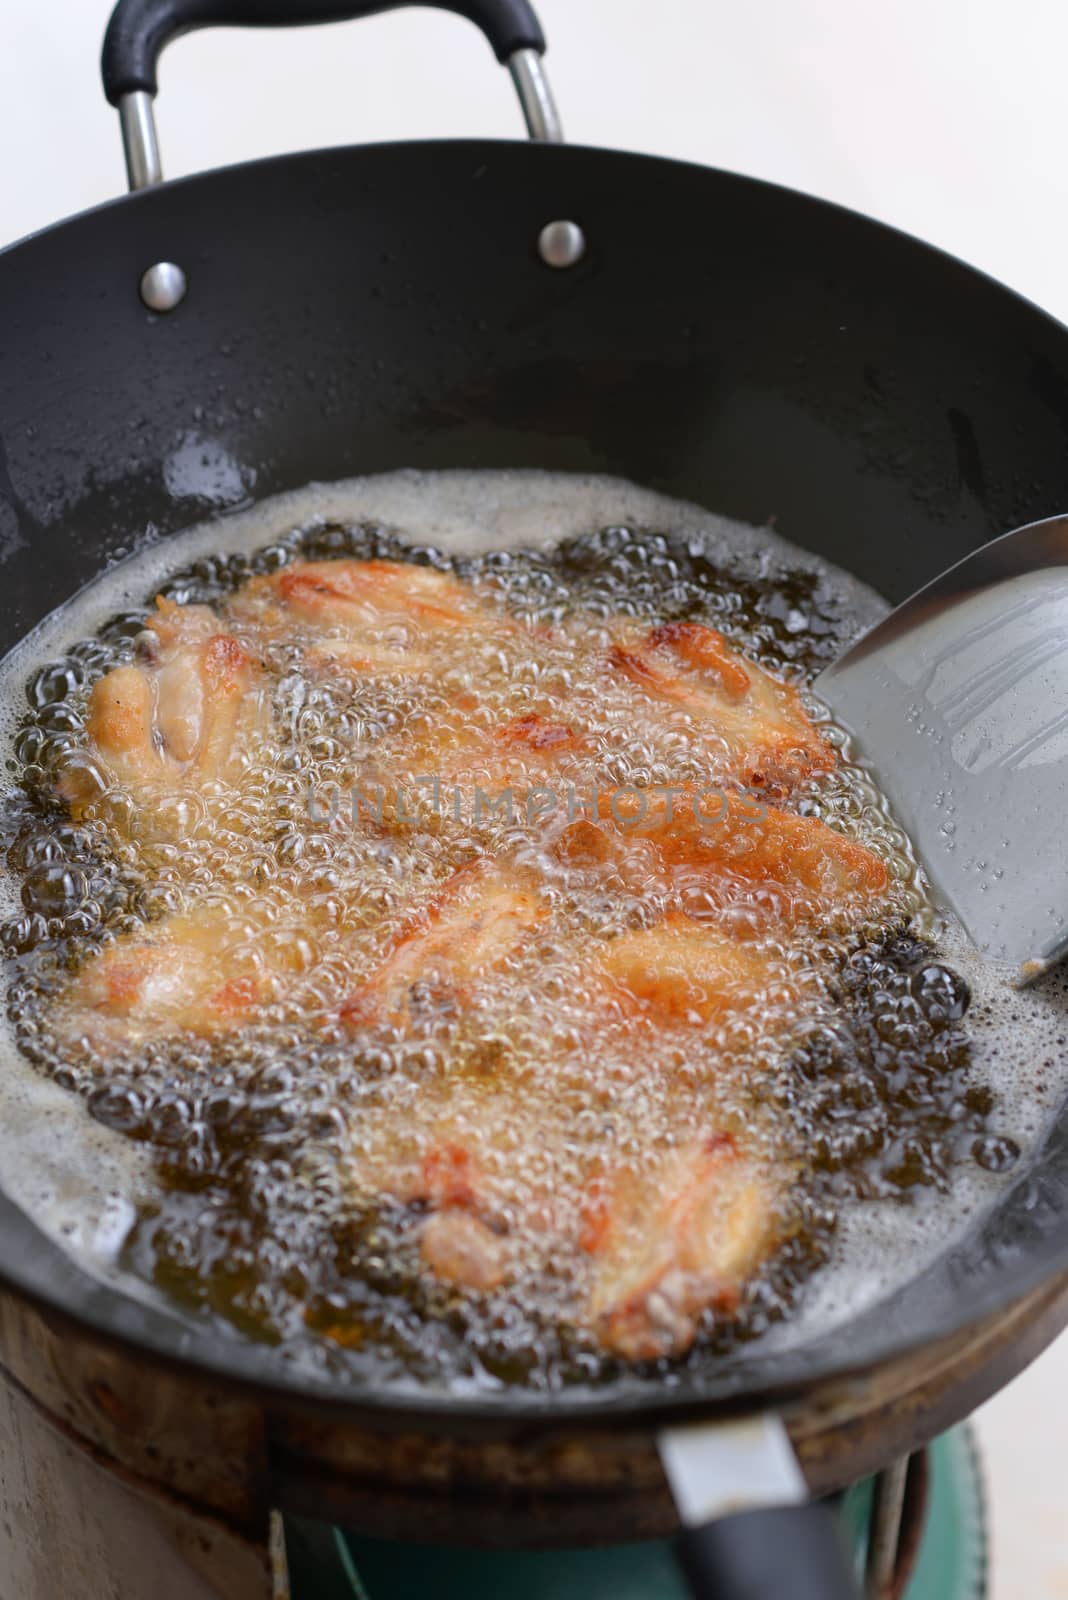 Chicken wings are frying in an iron pan with boiling oil.